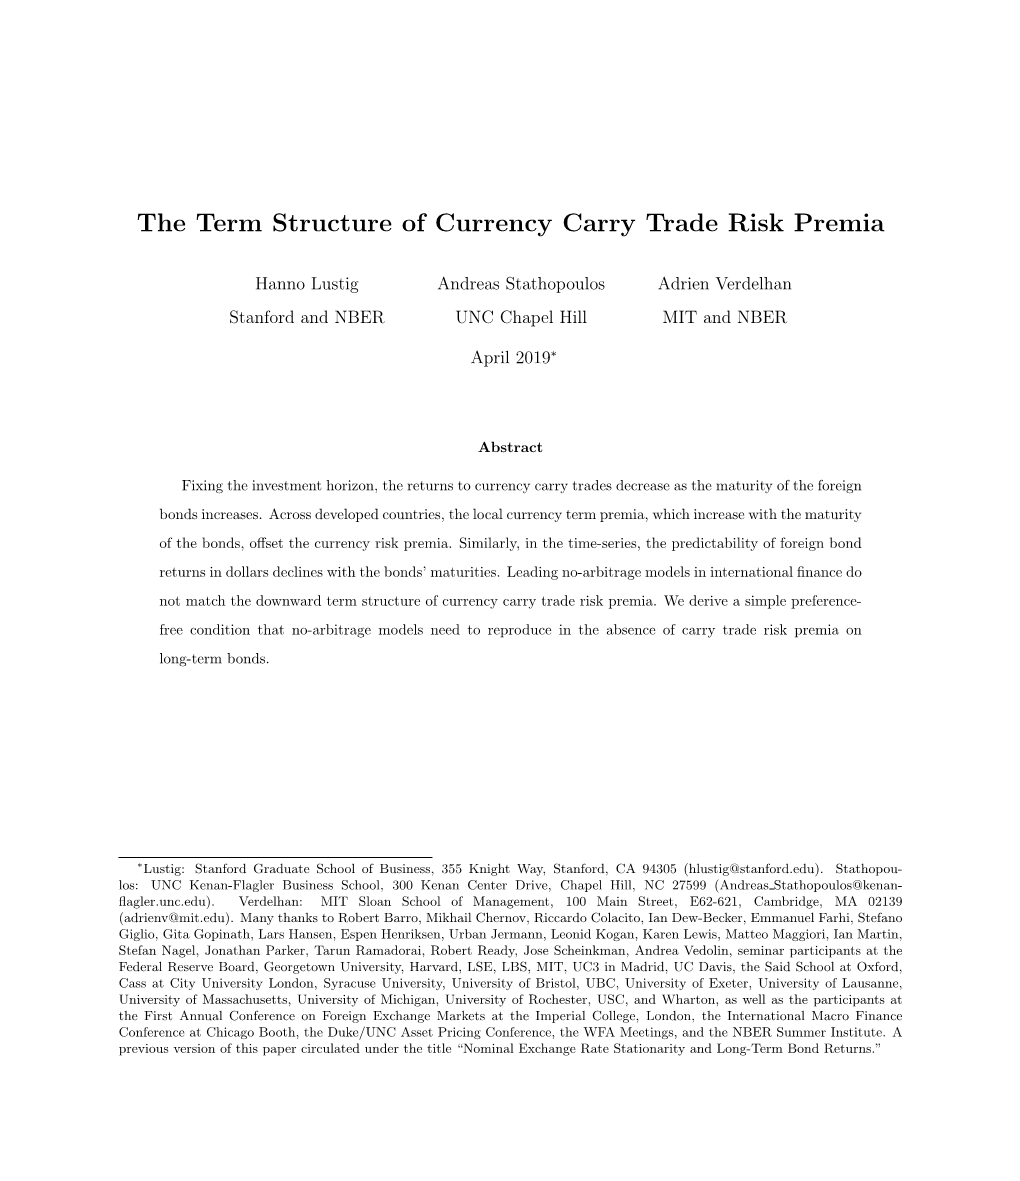 The Term Structure of Currency Carry Trade Risk Premia